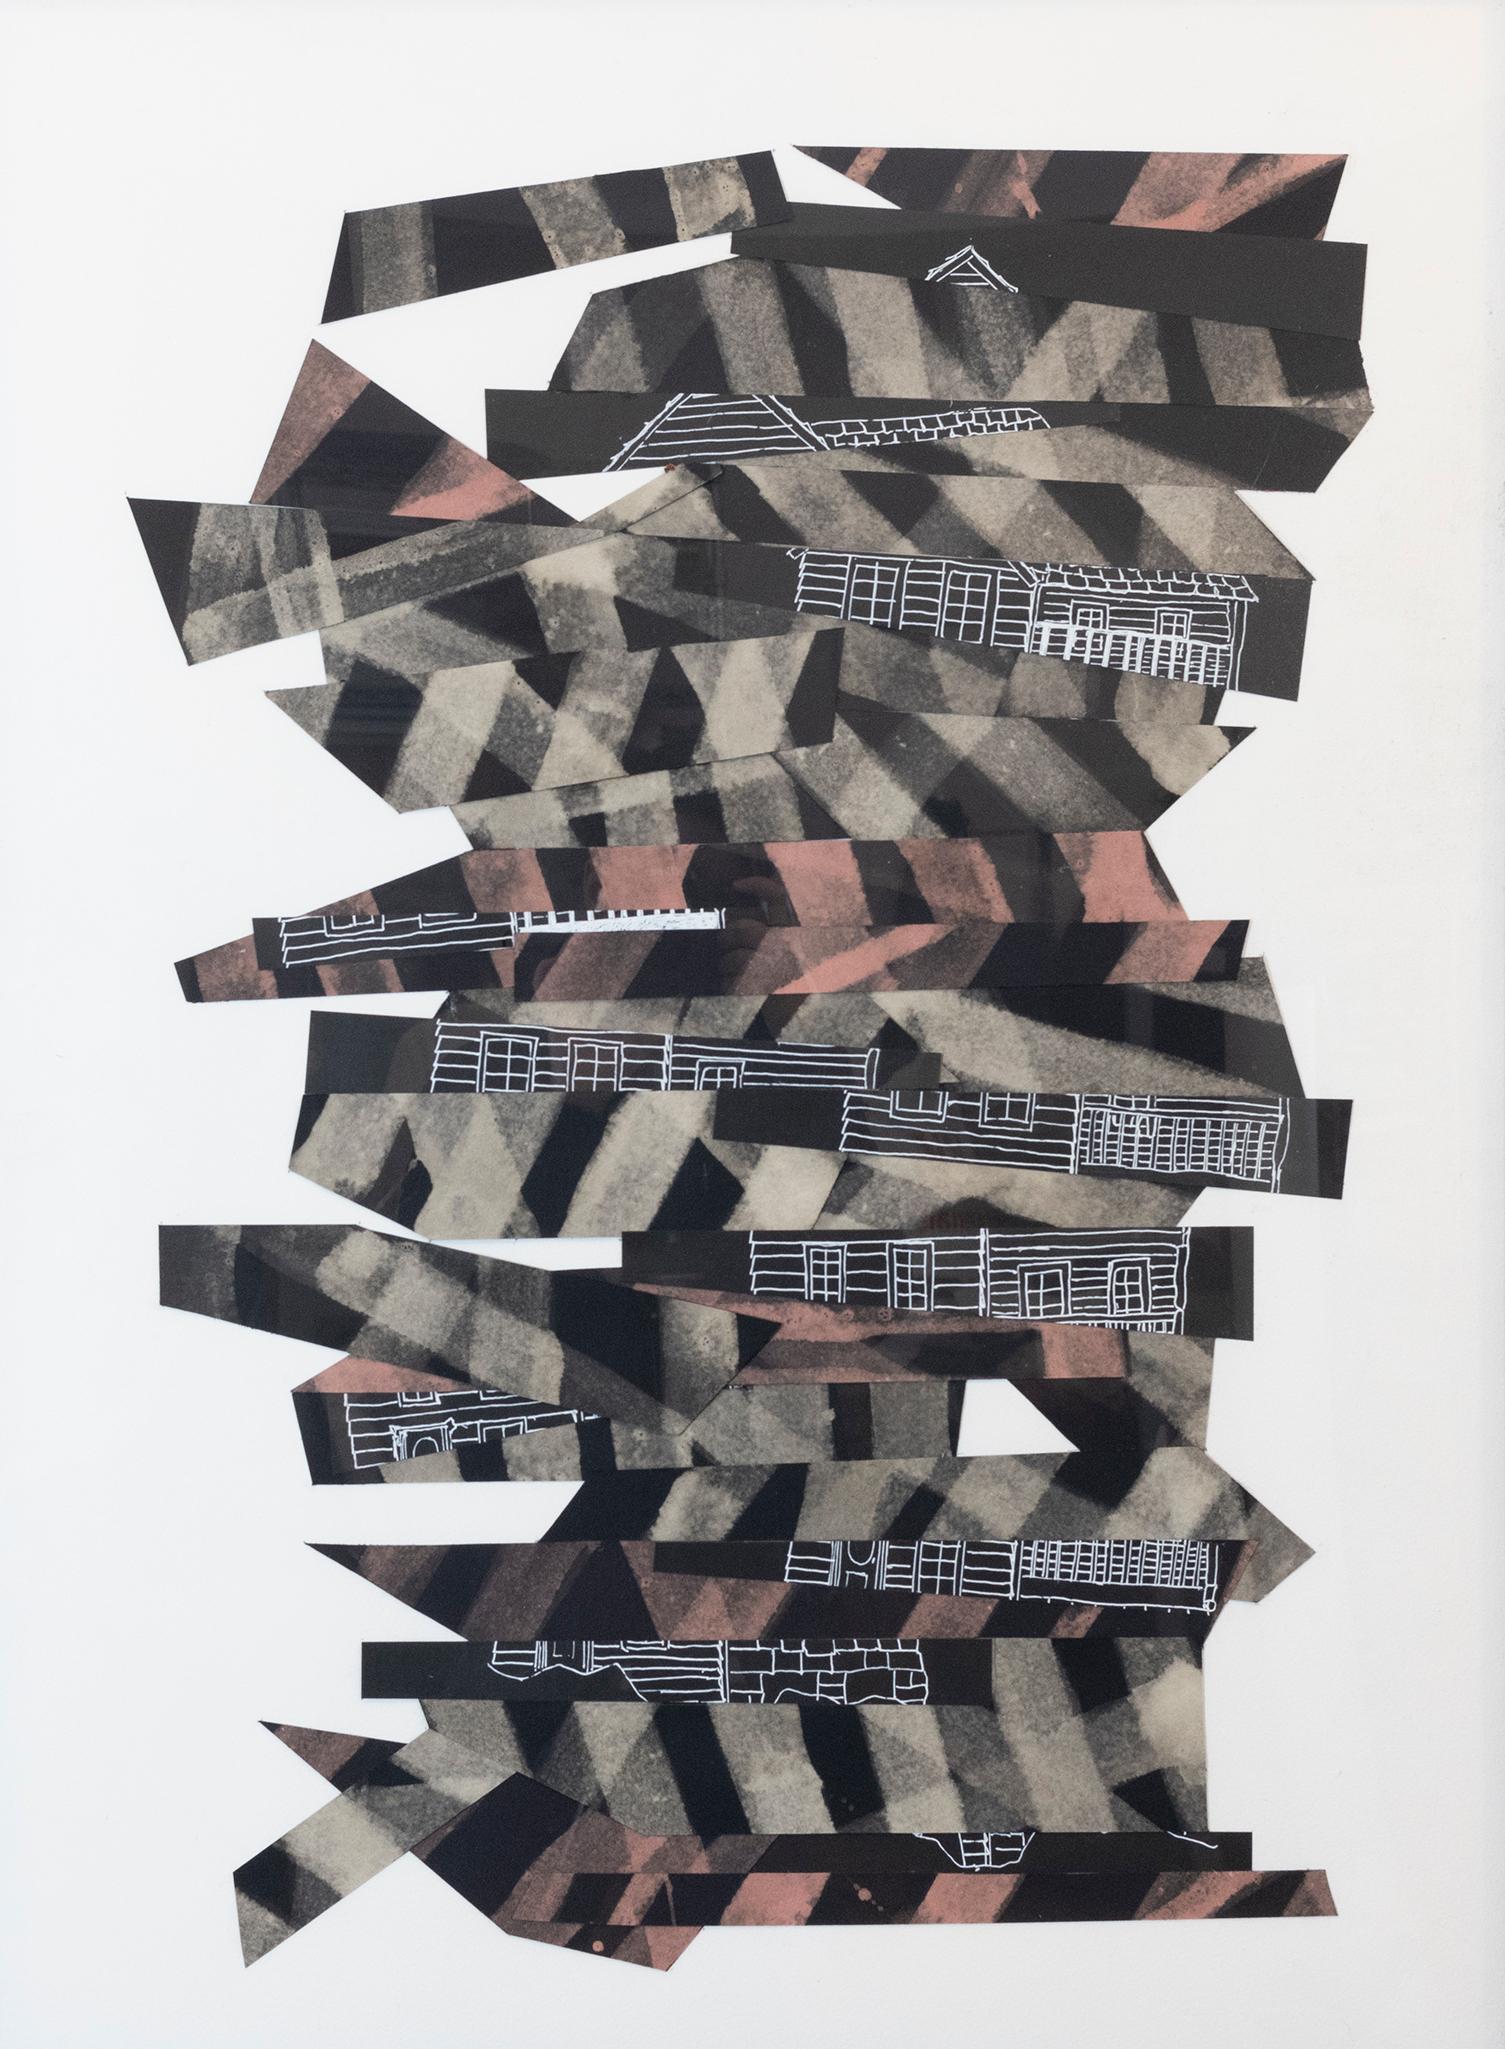 "Collapse", mixed media, abstract, collage, black, white, brown - Mixed Media Art by Susan Greer Emmerson